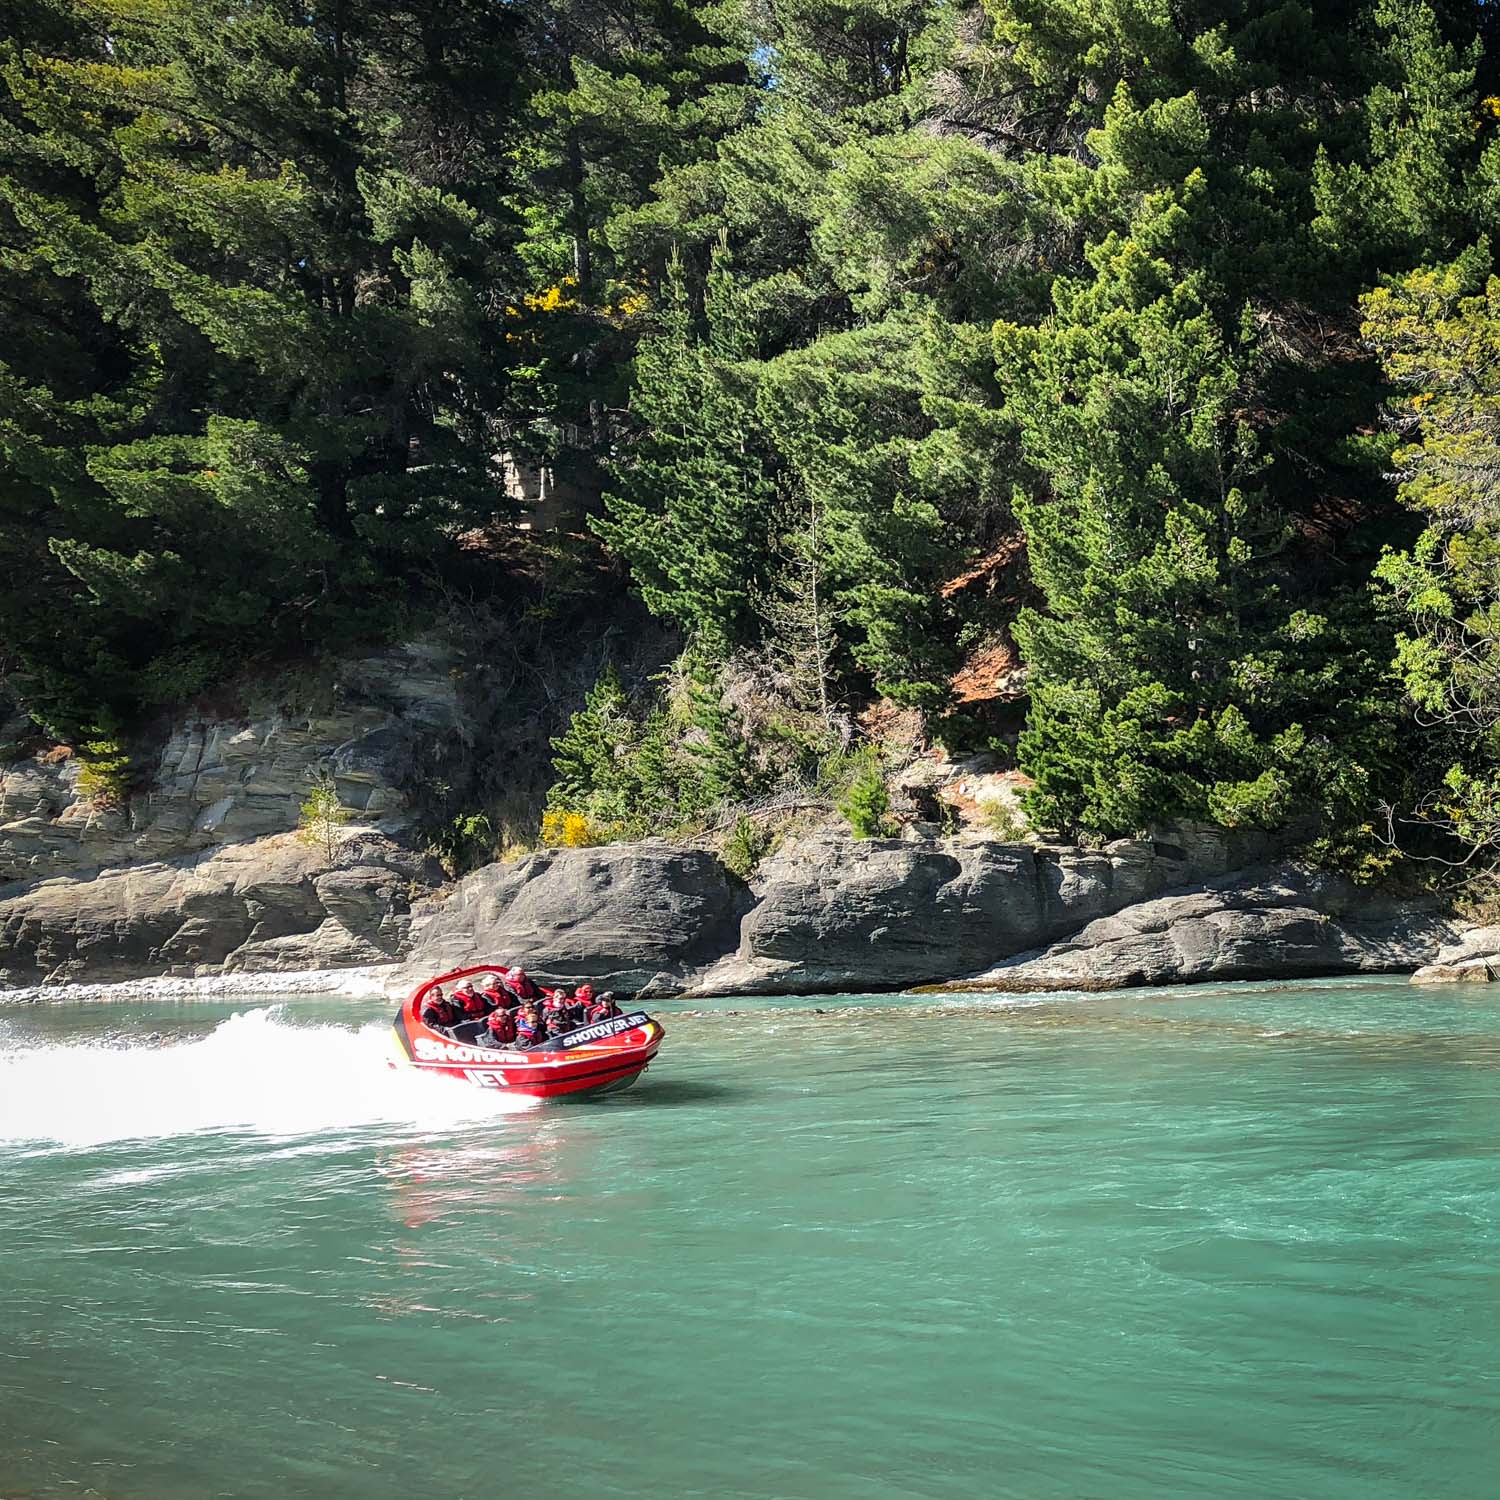 Adventure activities in Queenstown - jetboating the shotover canyon